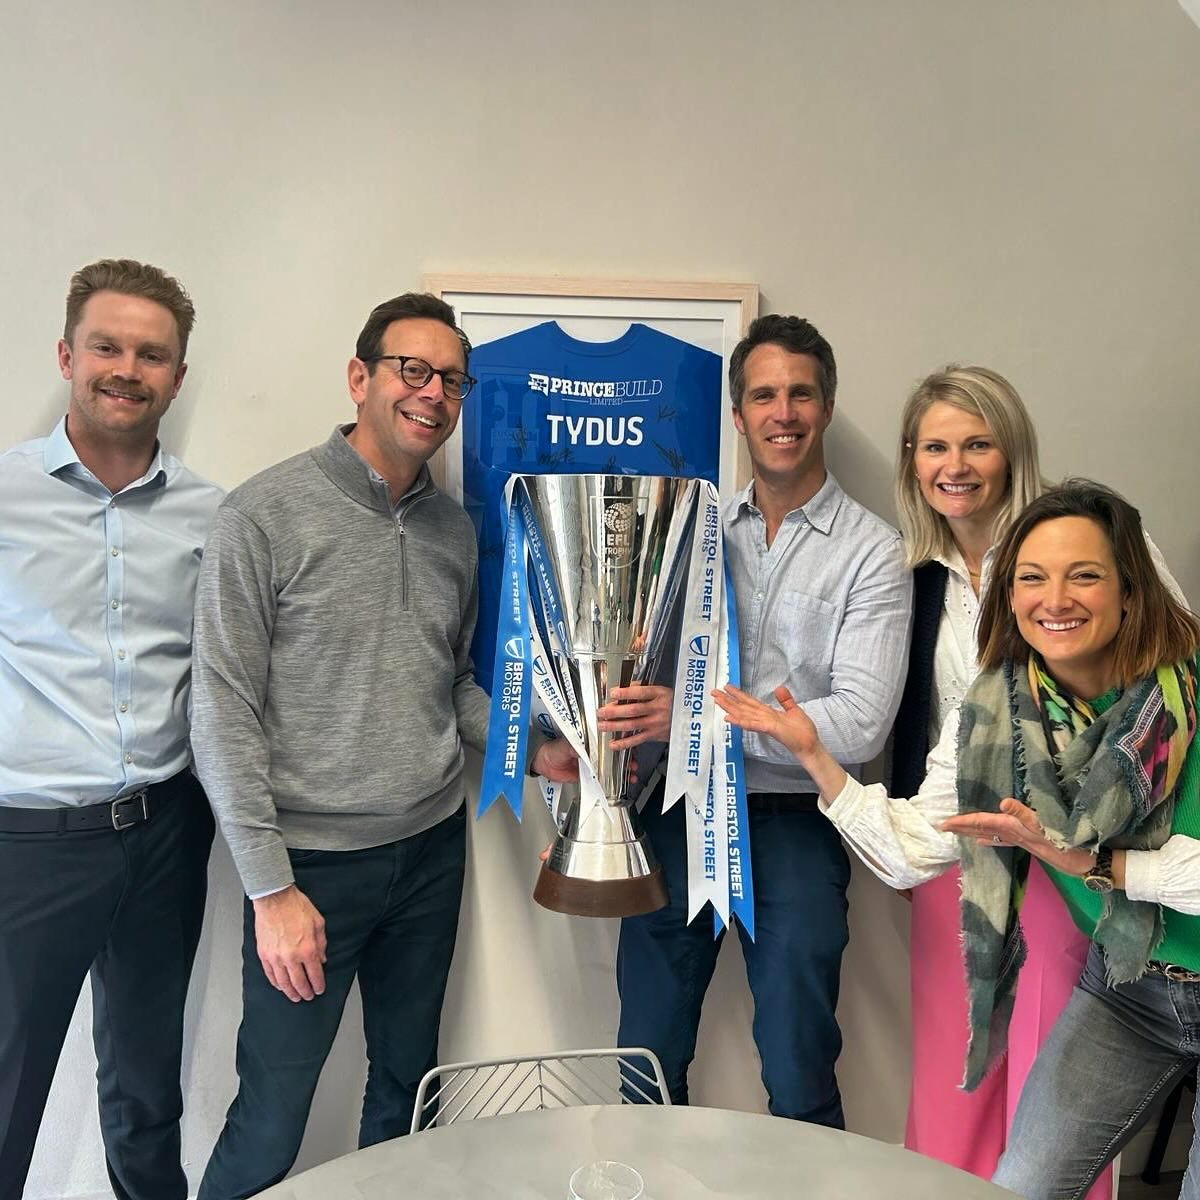 That was a lovely surprise from @bobbycopping @theposh for the Tydus Peterborough team today #eflcup #bristolstreetmotorstrophy